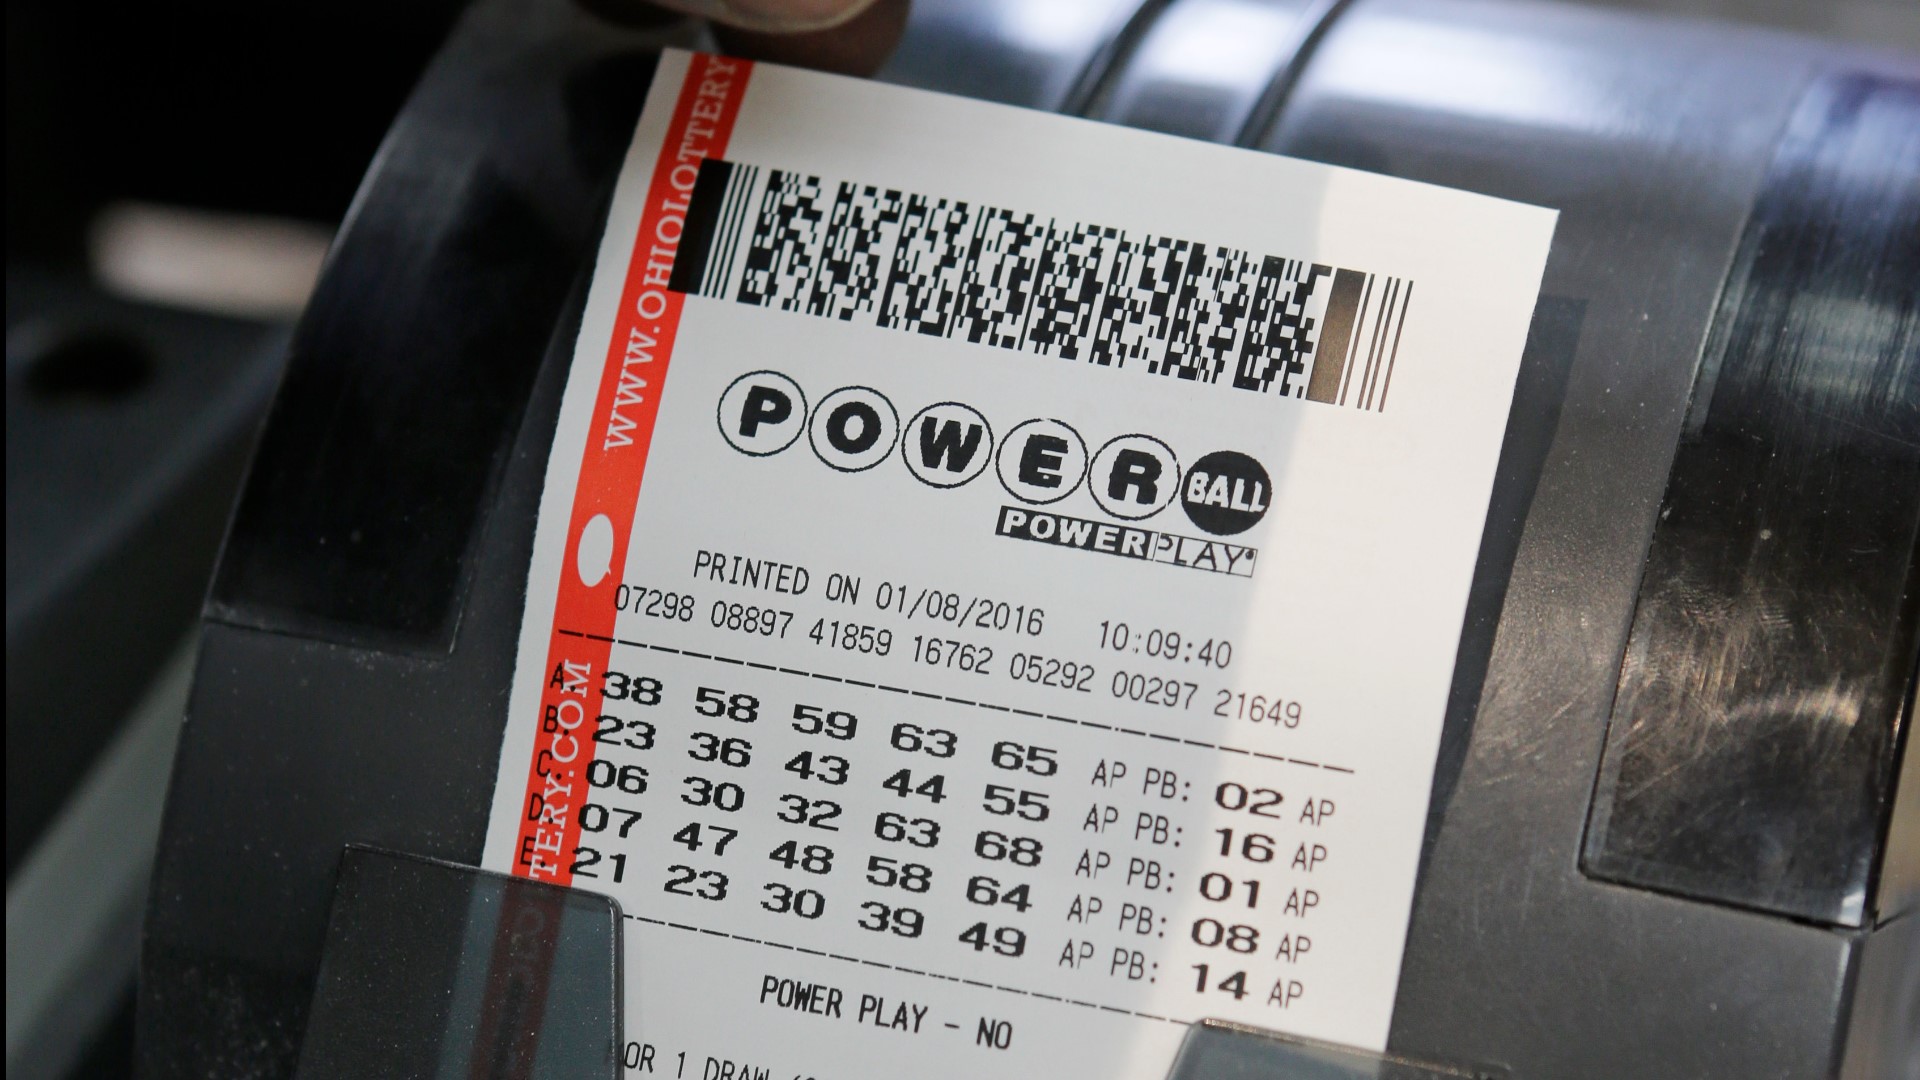 Wednesday’s win marks the 59th winner since 2012 of the $1 million or more for Powerball’s 5-of-5 prize.